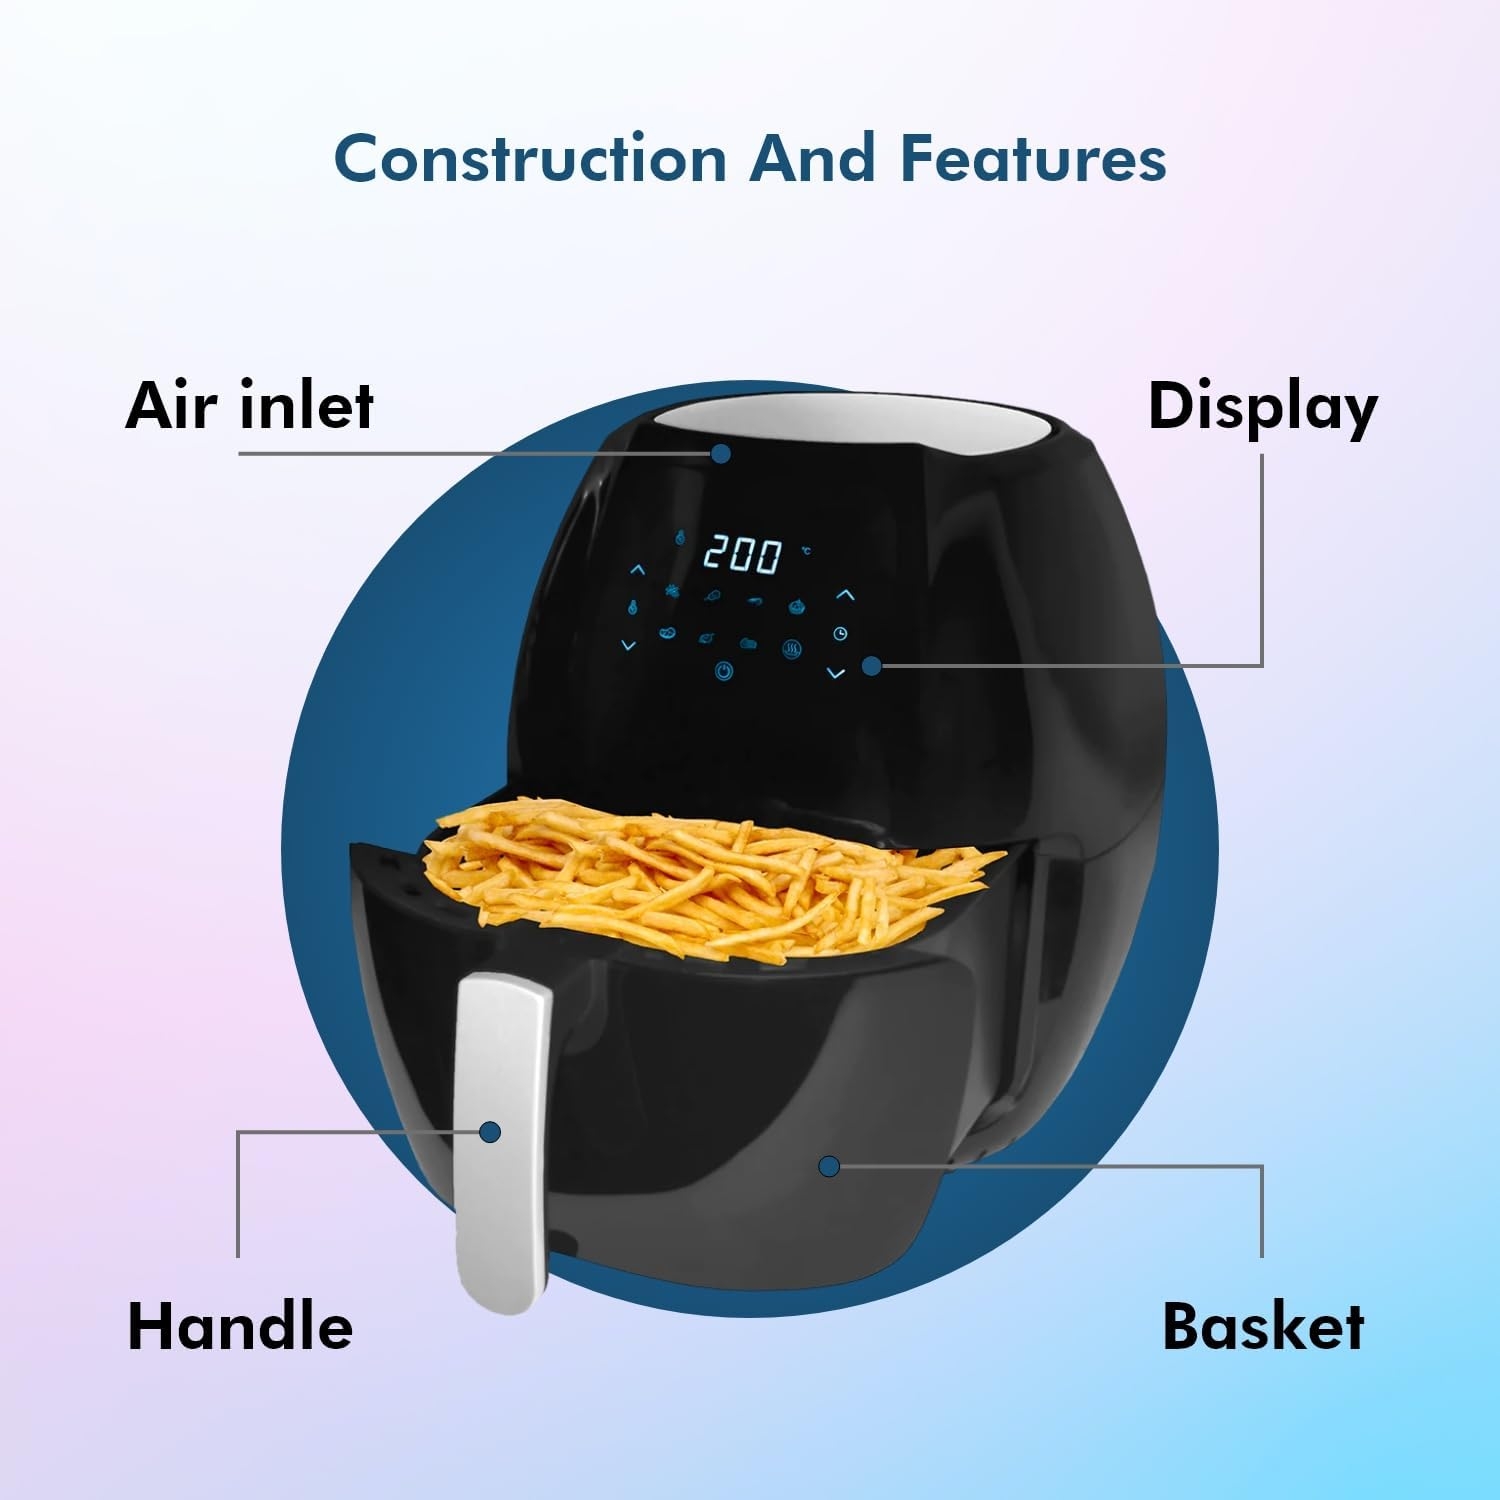 Healthy Choice 8 Litre Digital Air Fryer for Healthy Oil-Free Cooking -  Multi-Use 1800W One Touch Digital Oven Cooker for Deep Frying, Roasting,  Baking & Grilling - 8 Presets Cooking Programs, Black 